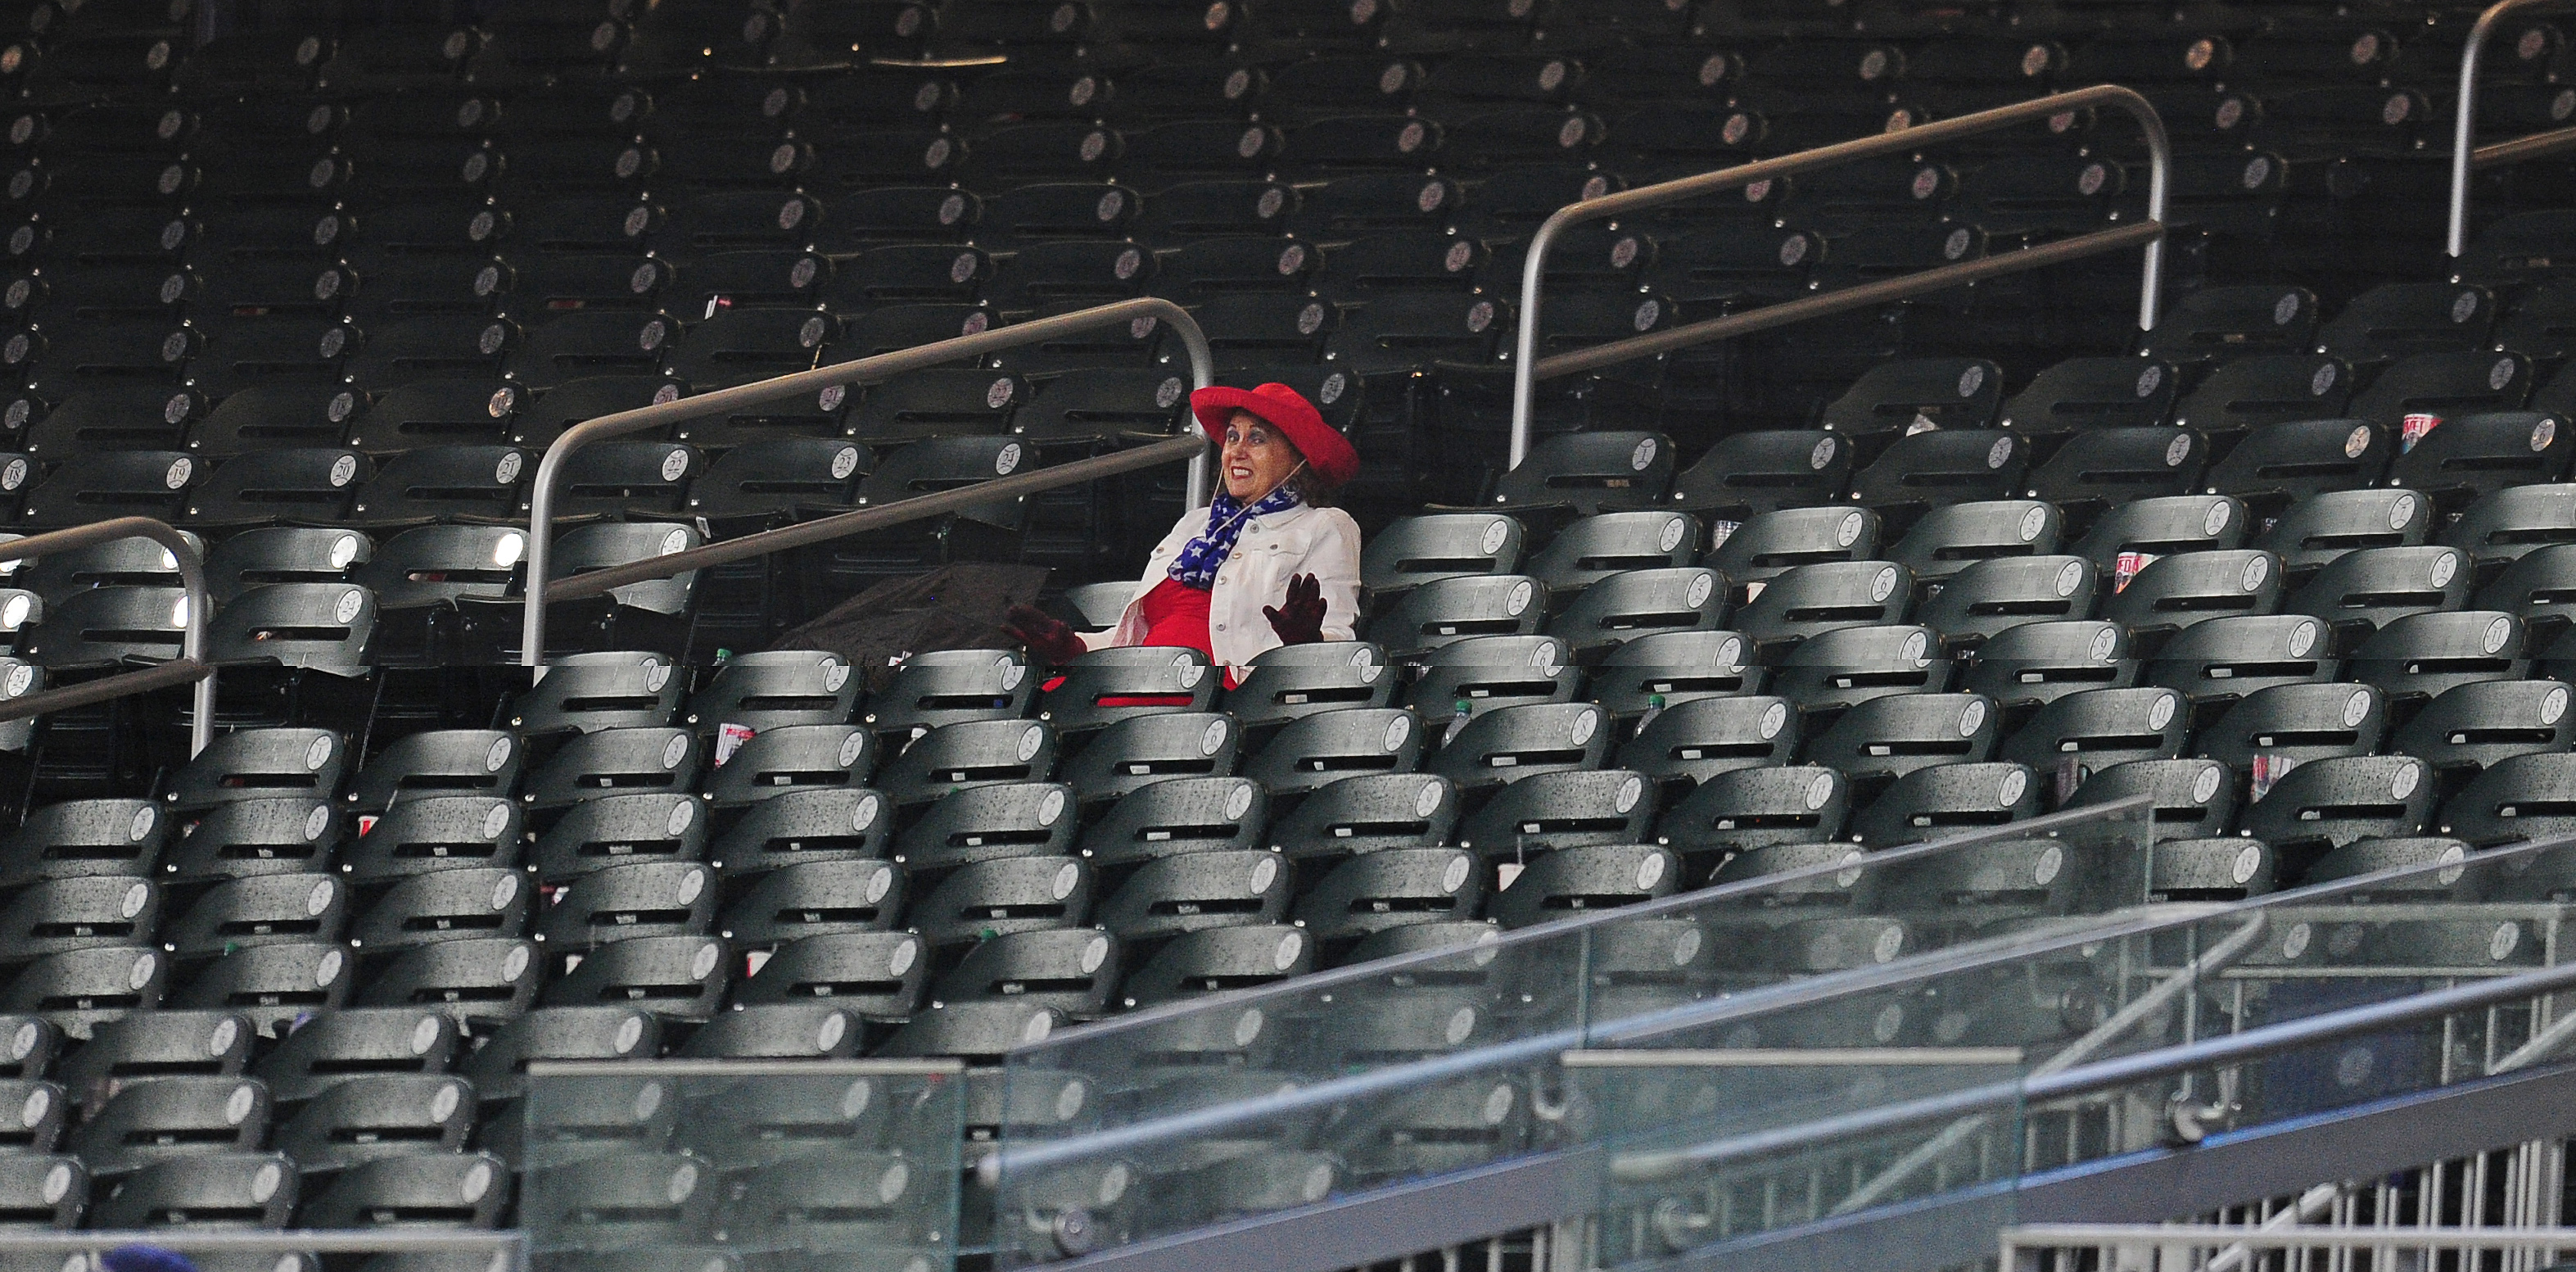 Atlanta Braves fans are growing impatient, and it's not pretty